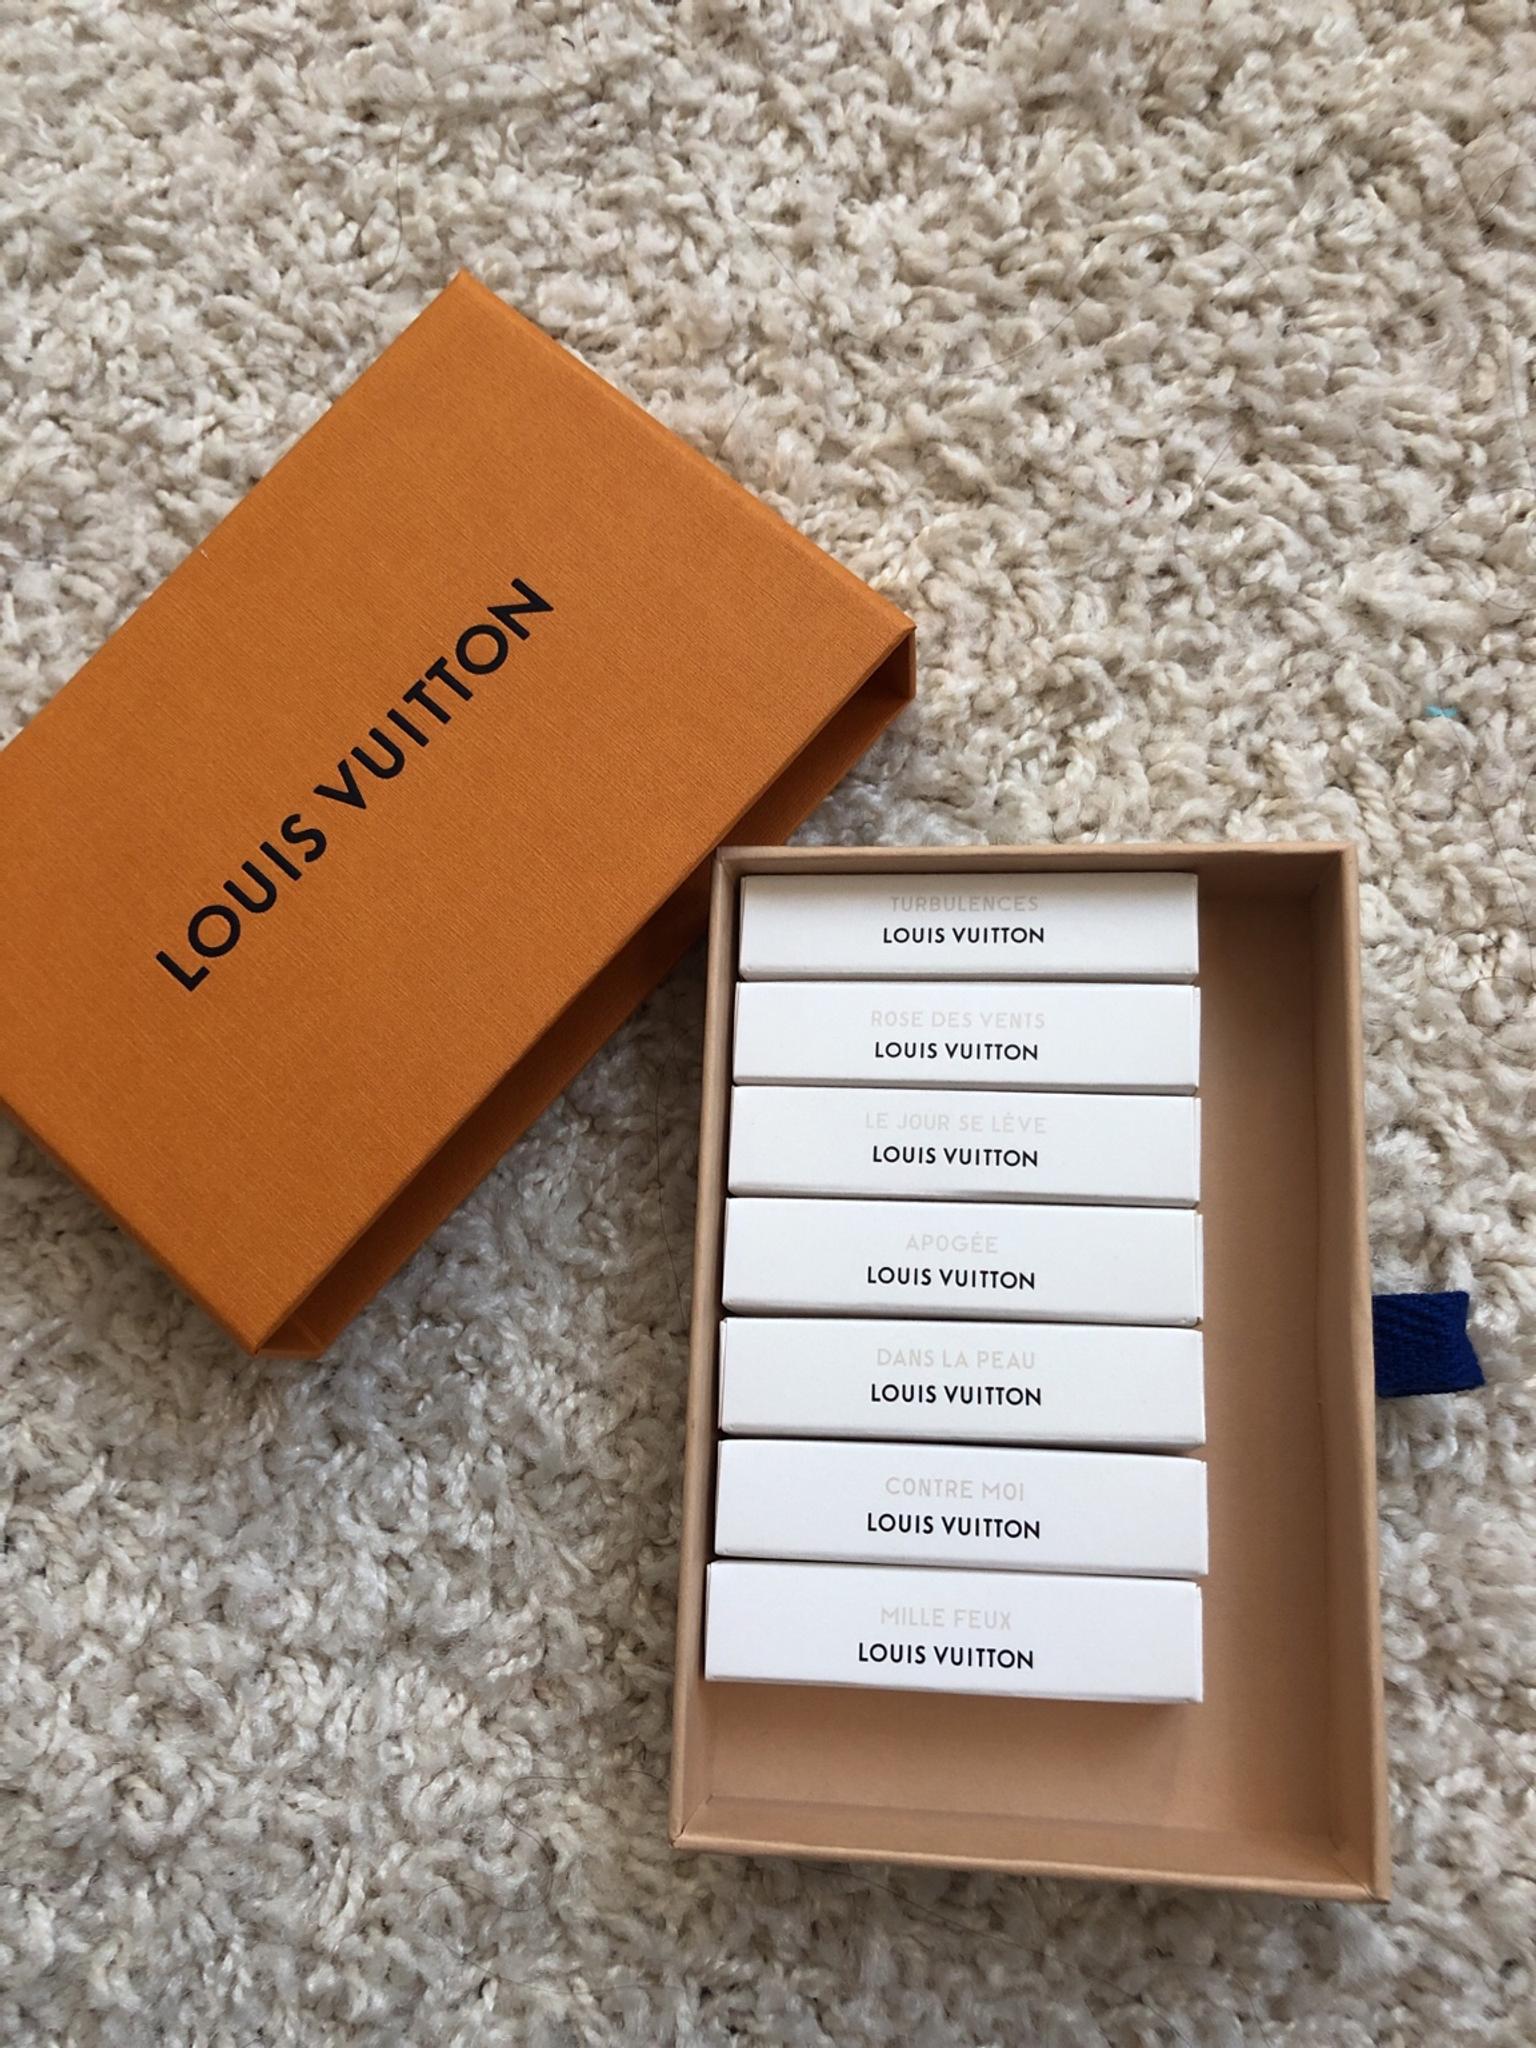 NEW ! LOUIS VUITTON PERFUME SAMPLES 3 BOXES for Sale in